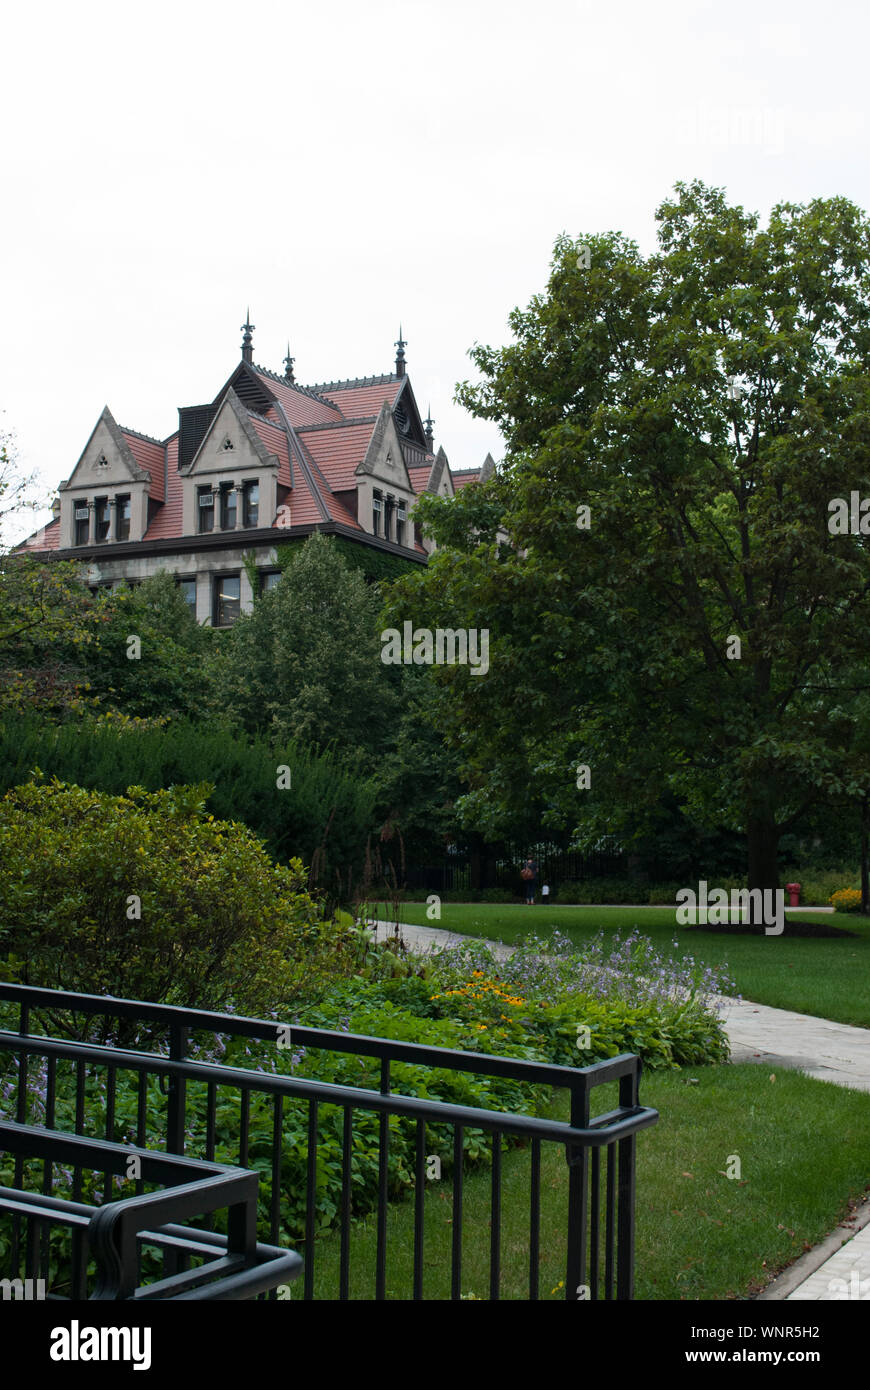 American universities. University of Chicago. English Gothic style of architecture Stock Photo